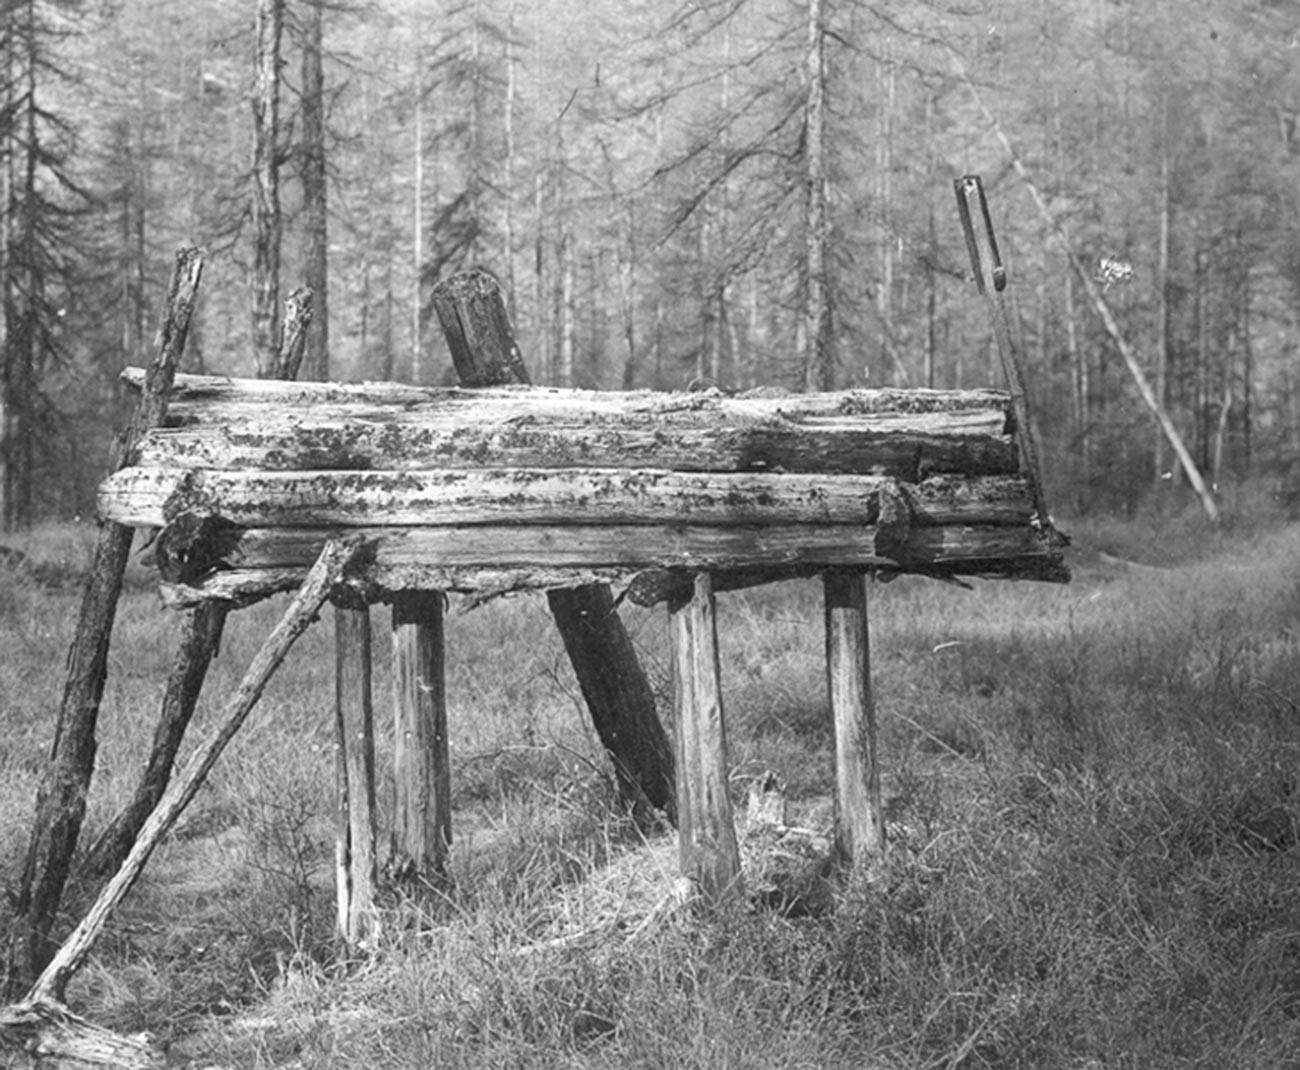 An above-the-ground burial found in a Russian forest